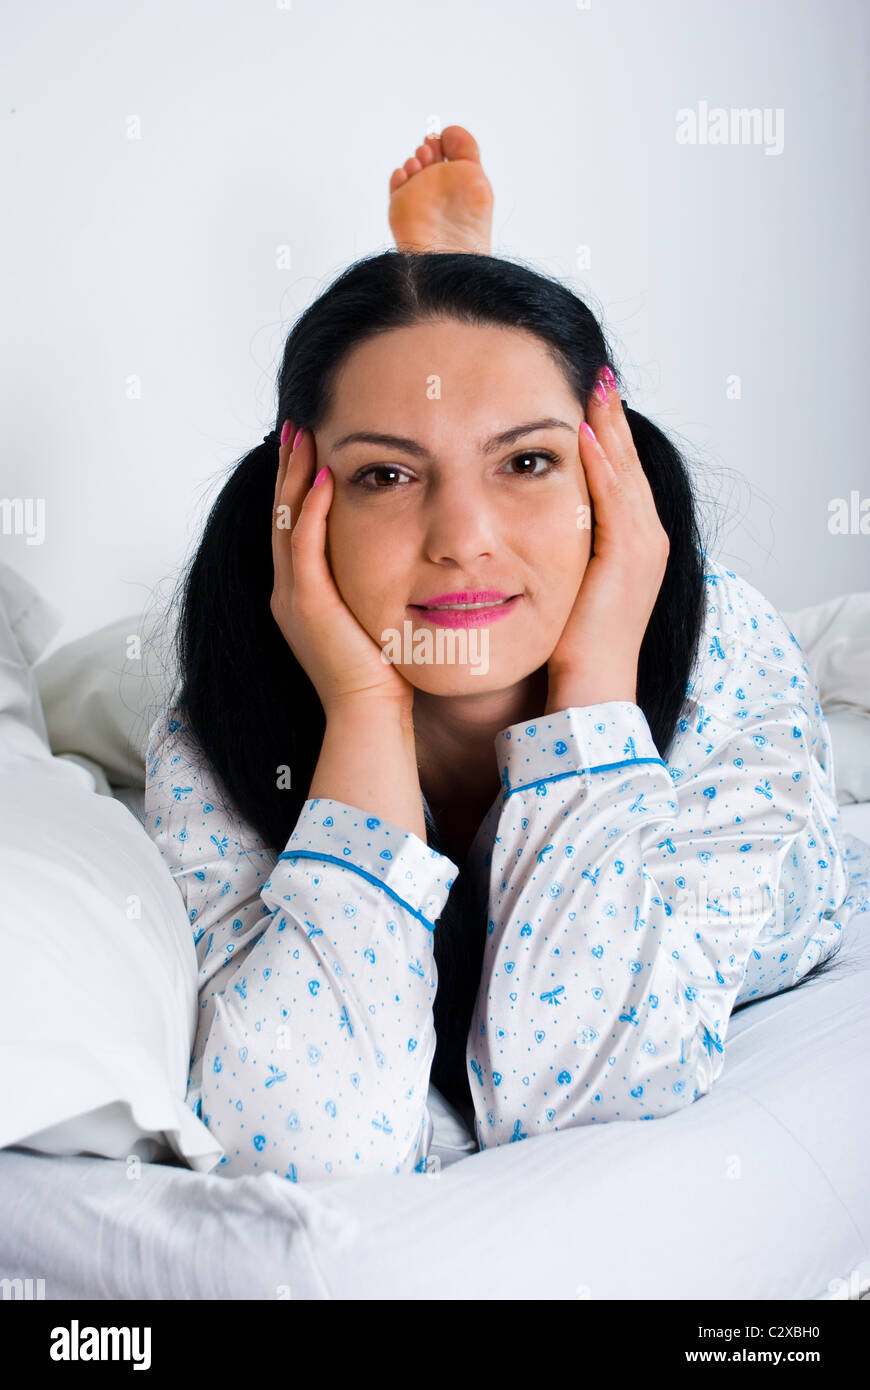 https://c8.alamy.com/comp/C2XBH0/happy-woman-laying-on-bed-with-legs-up-and-holding-hands-on-face-C2XBH0.jpg